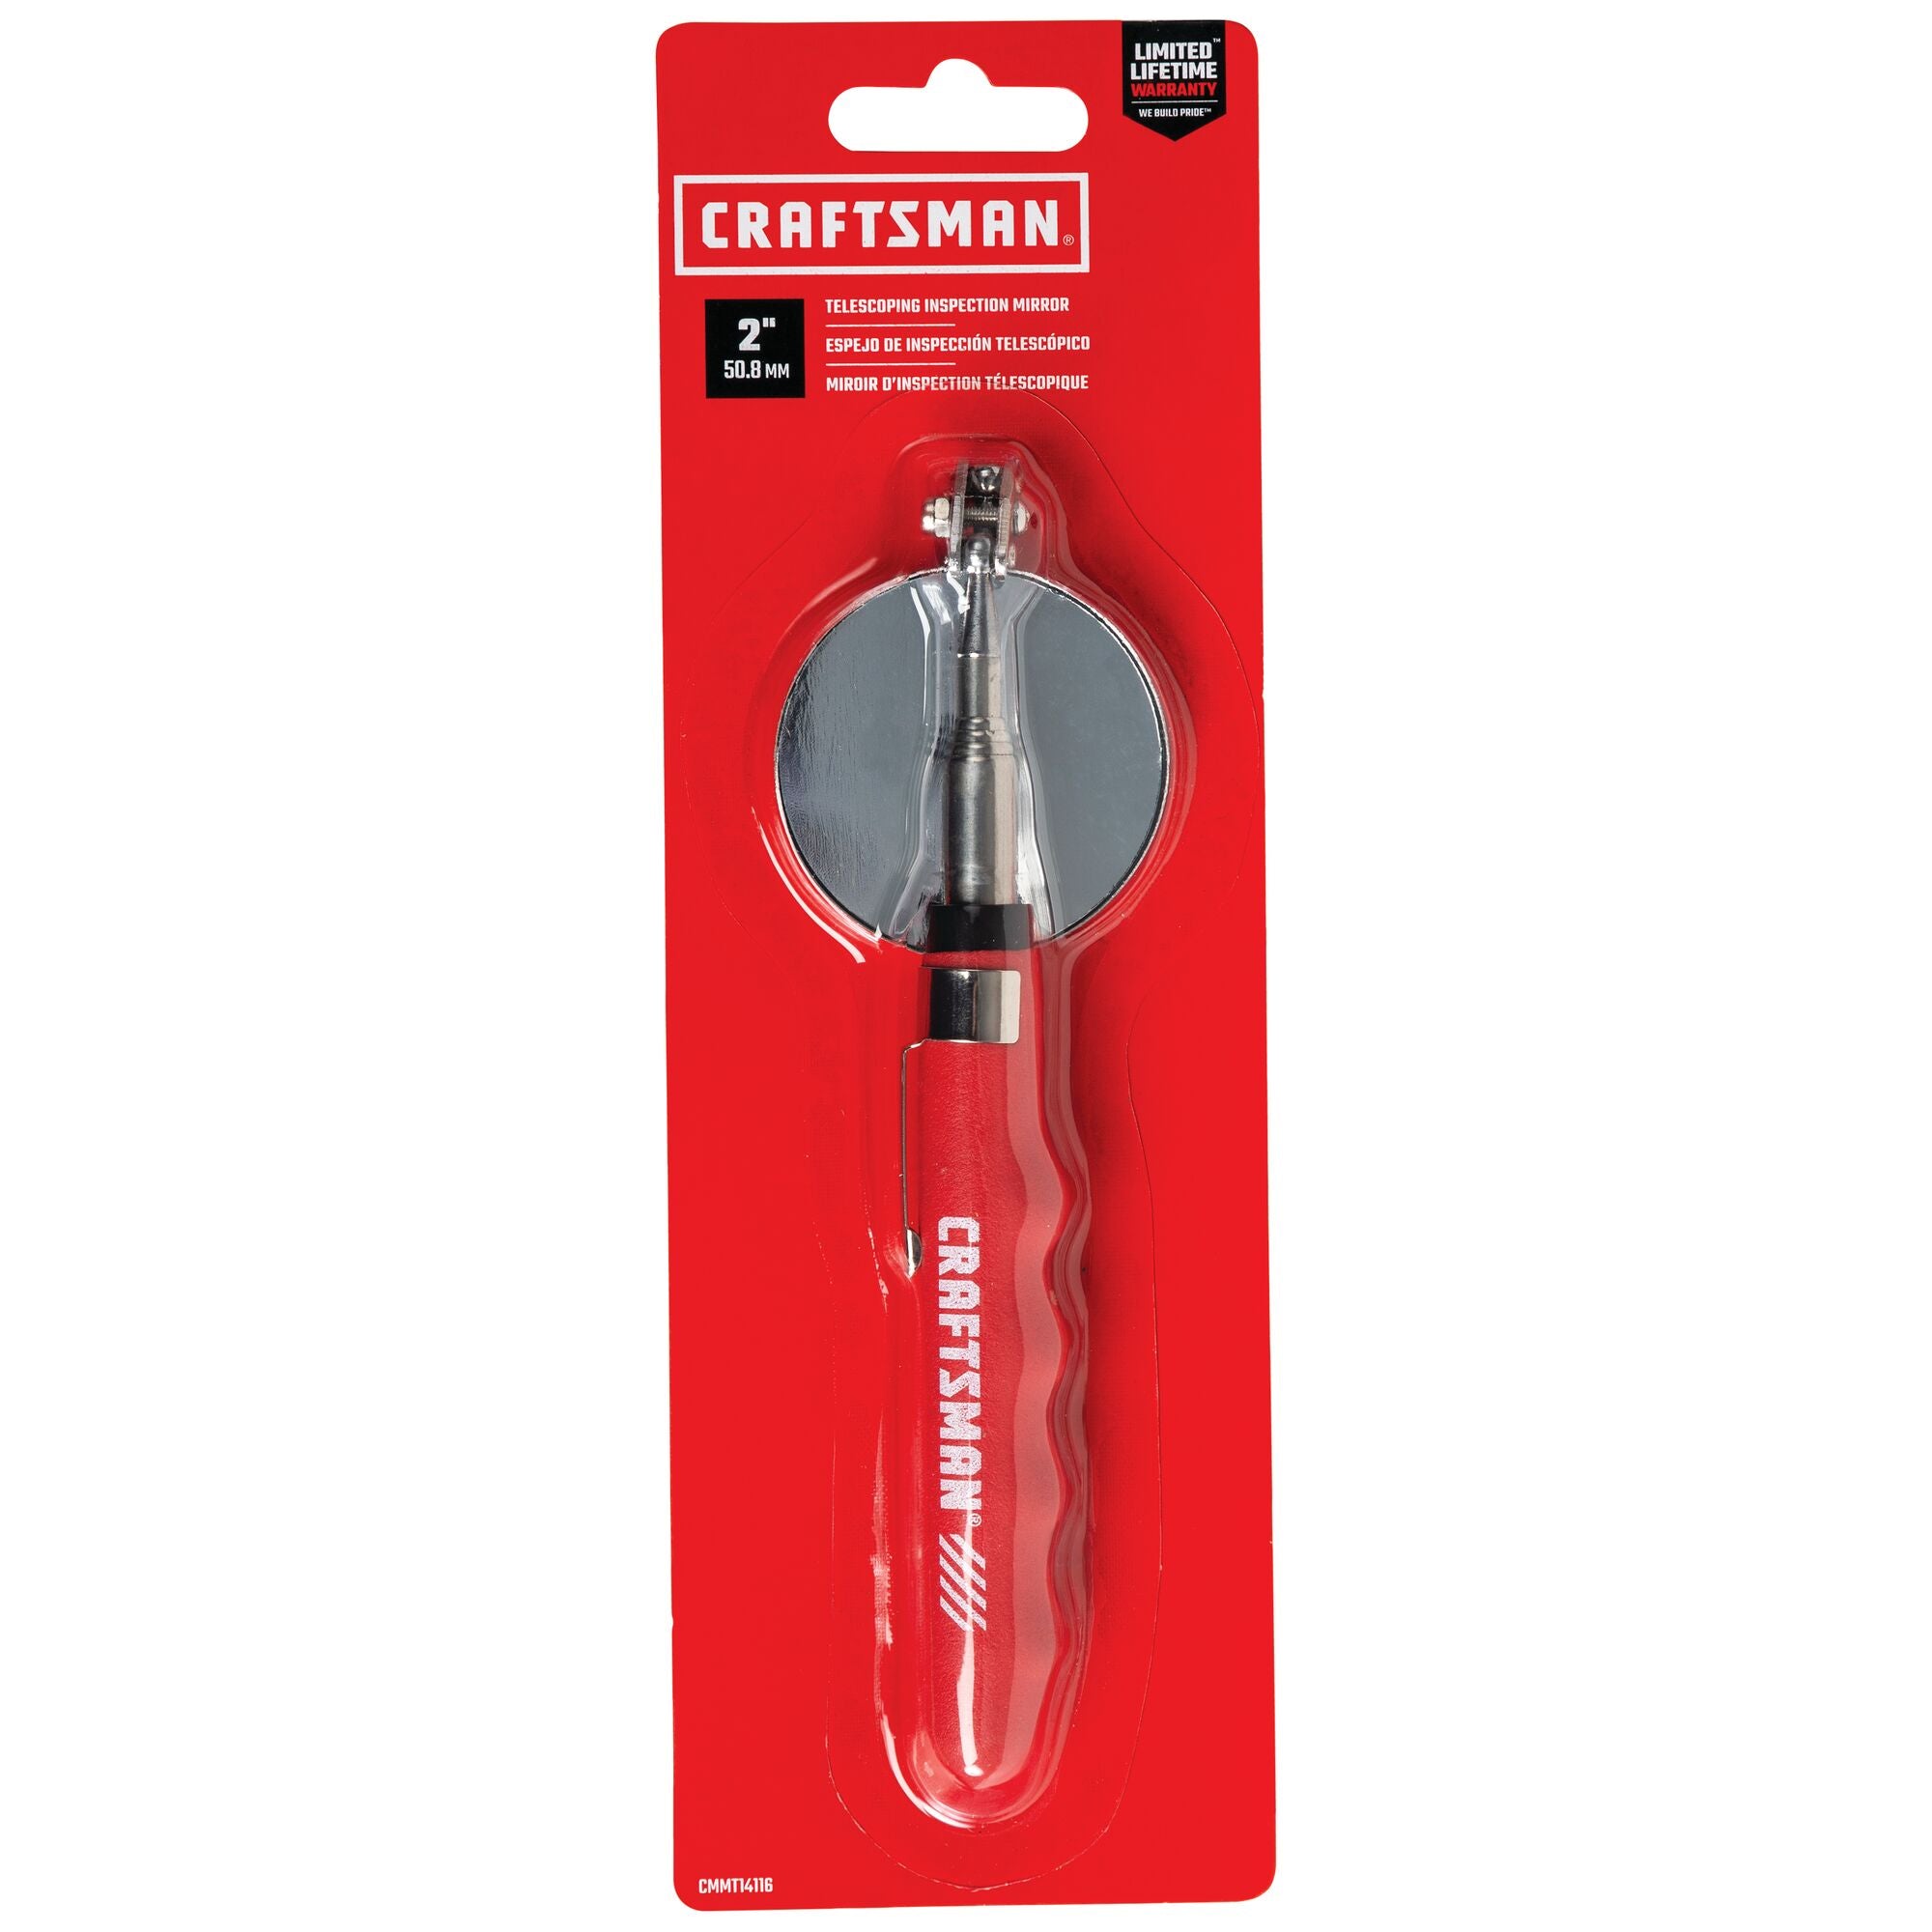 Testing the Craftsman Hand Tool Warranty at Lowe's